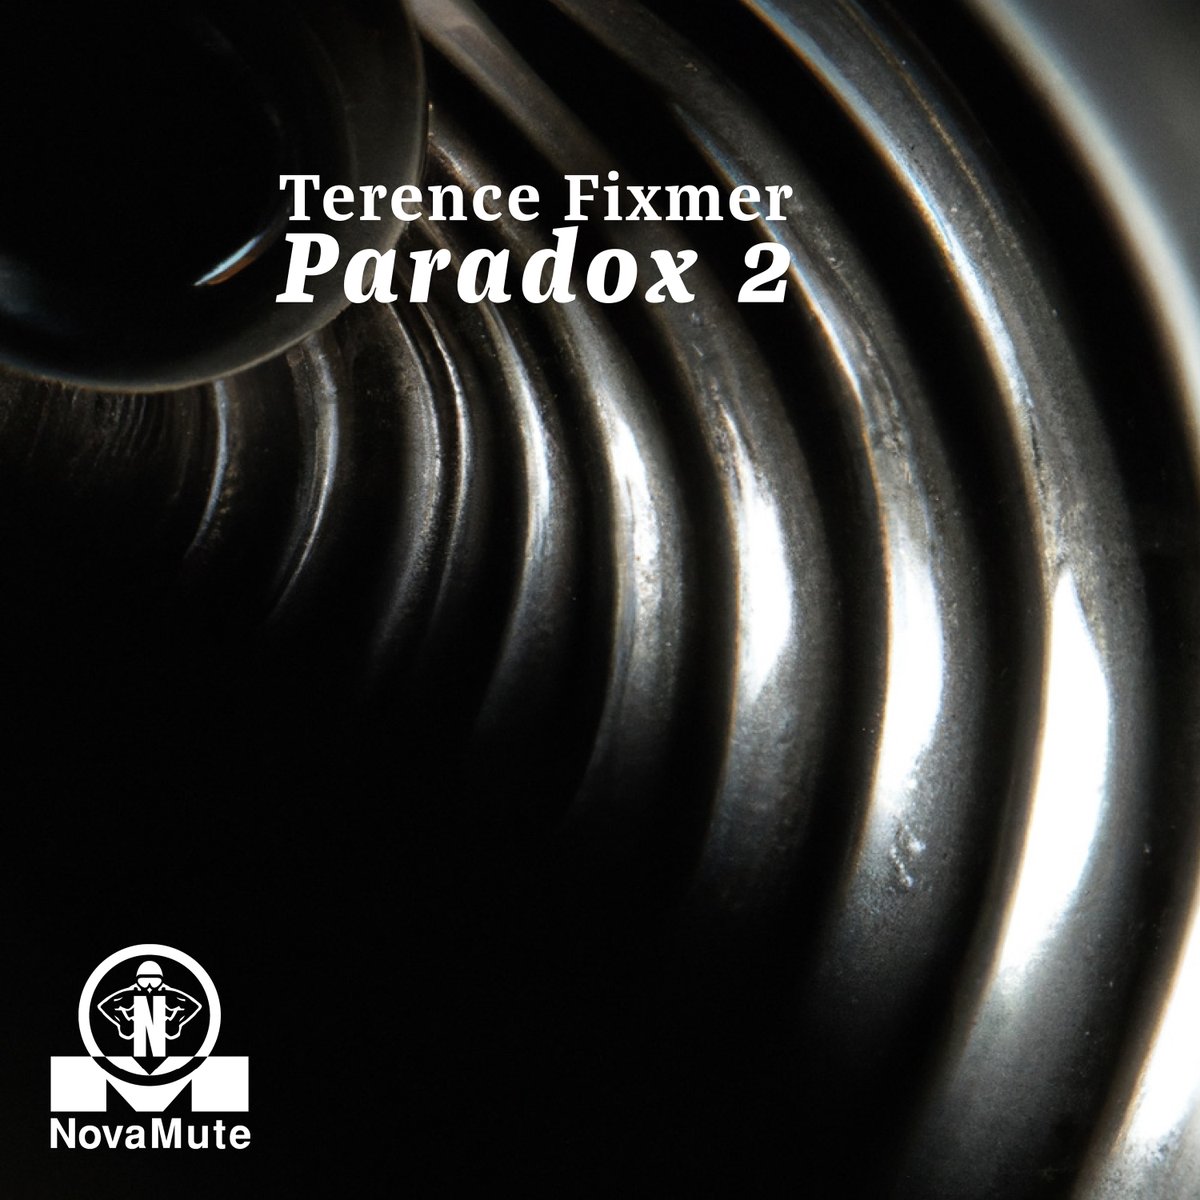 Paradox 2 from @terencefixmer now available to pre-order on @beatport.